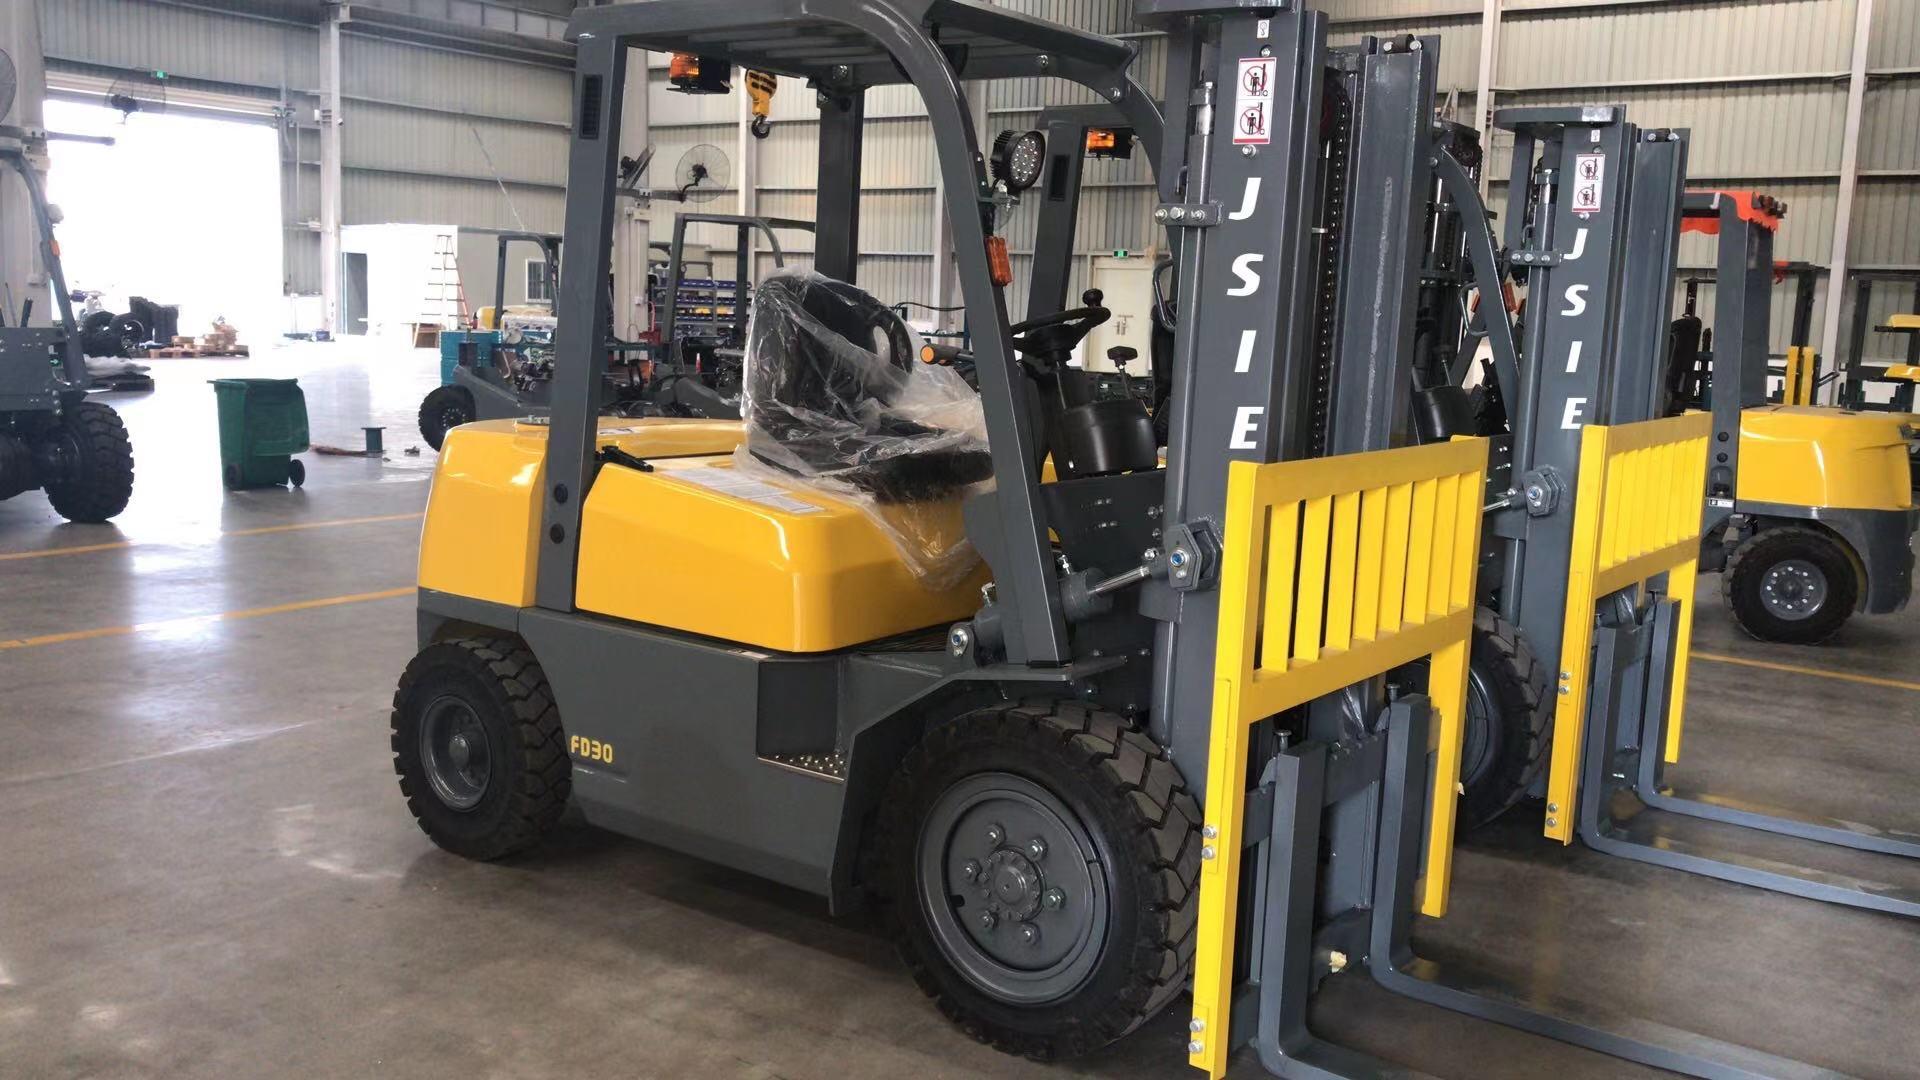 Customized Forklift Attachment Gripper for Forklift